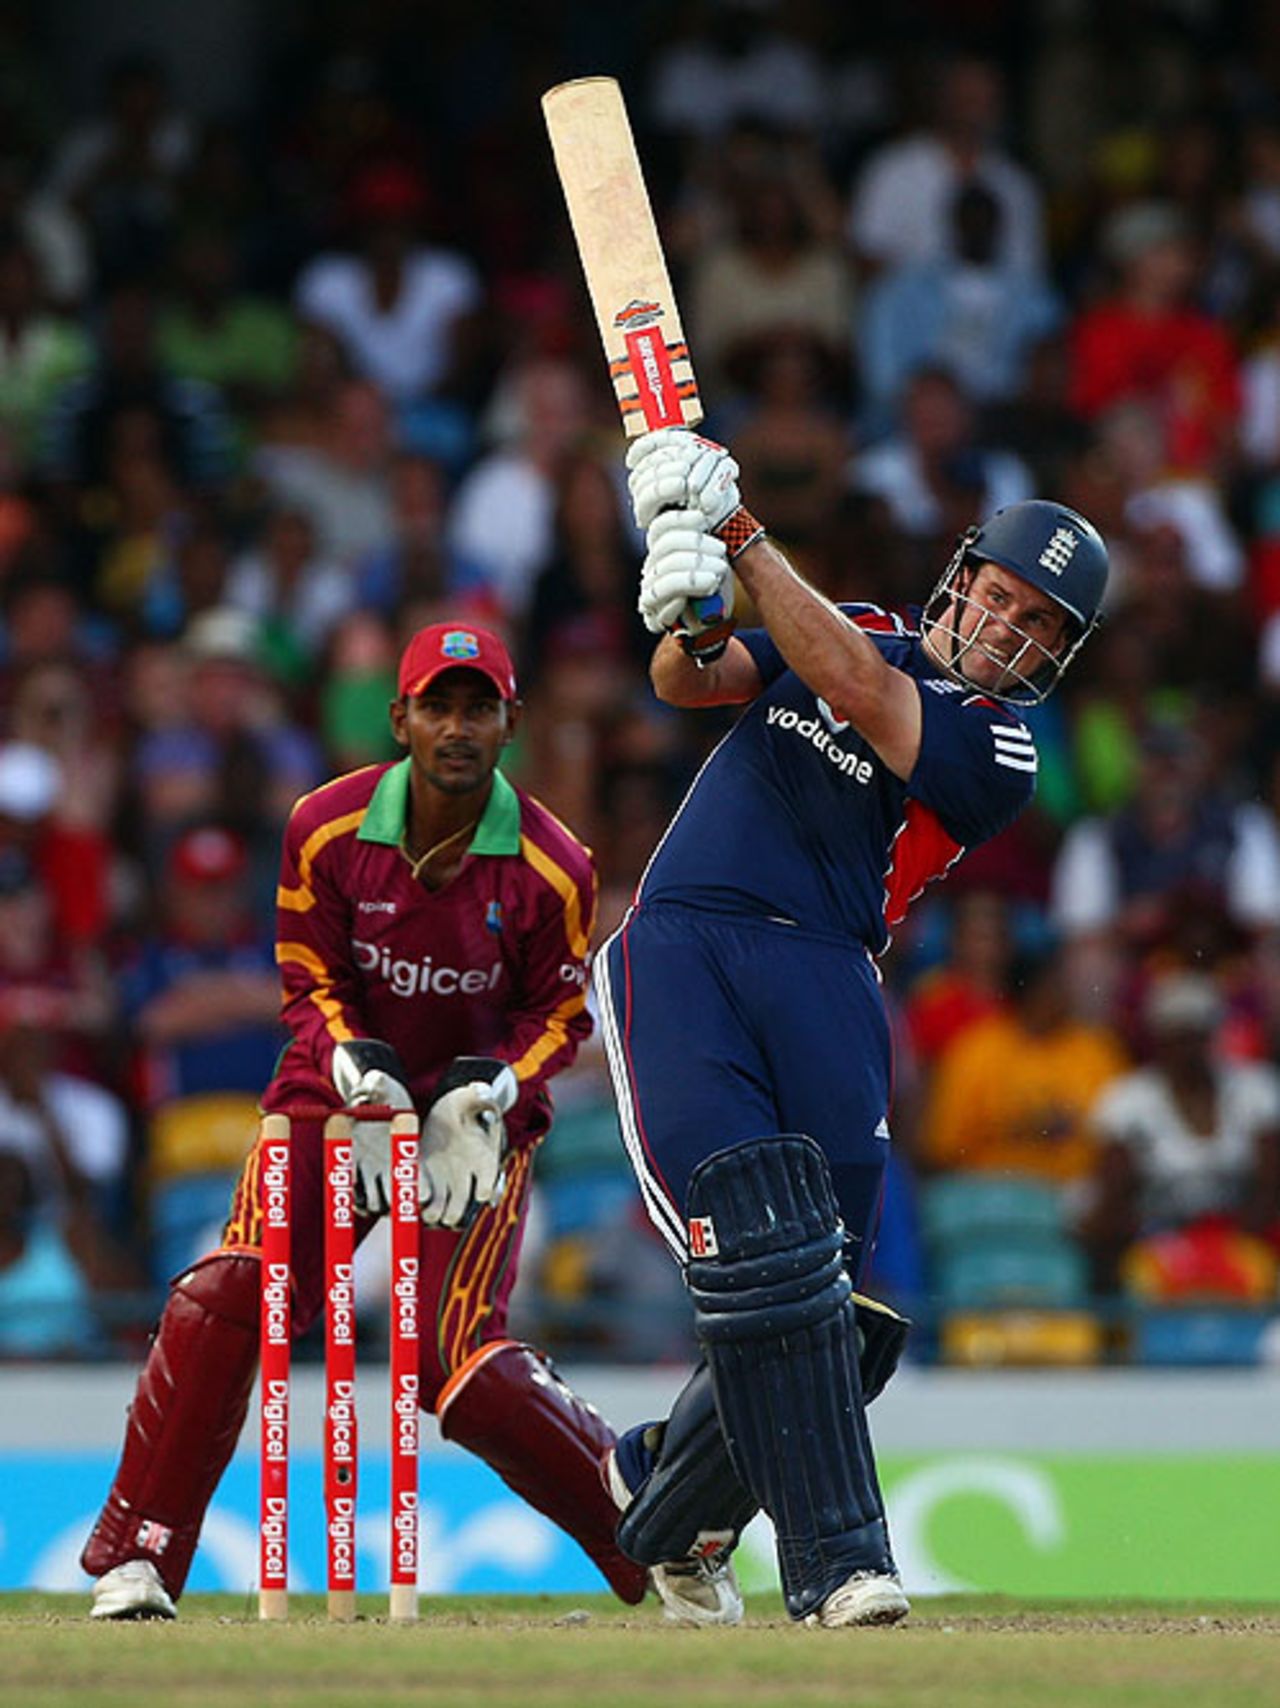 Andrew Strauss launches another boundary during his remarkable matchwinning innings, West Indies v England, 4th ODI, Bridgetown, March 29, 2009